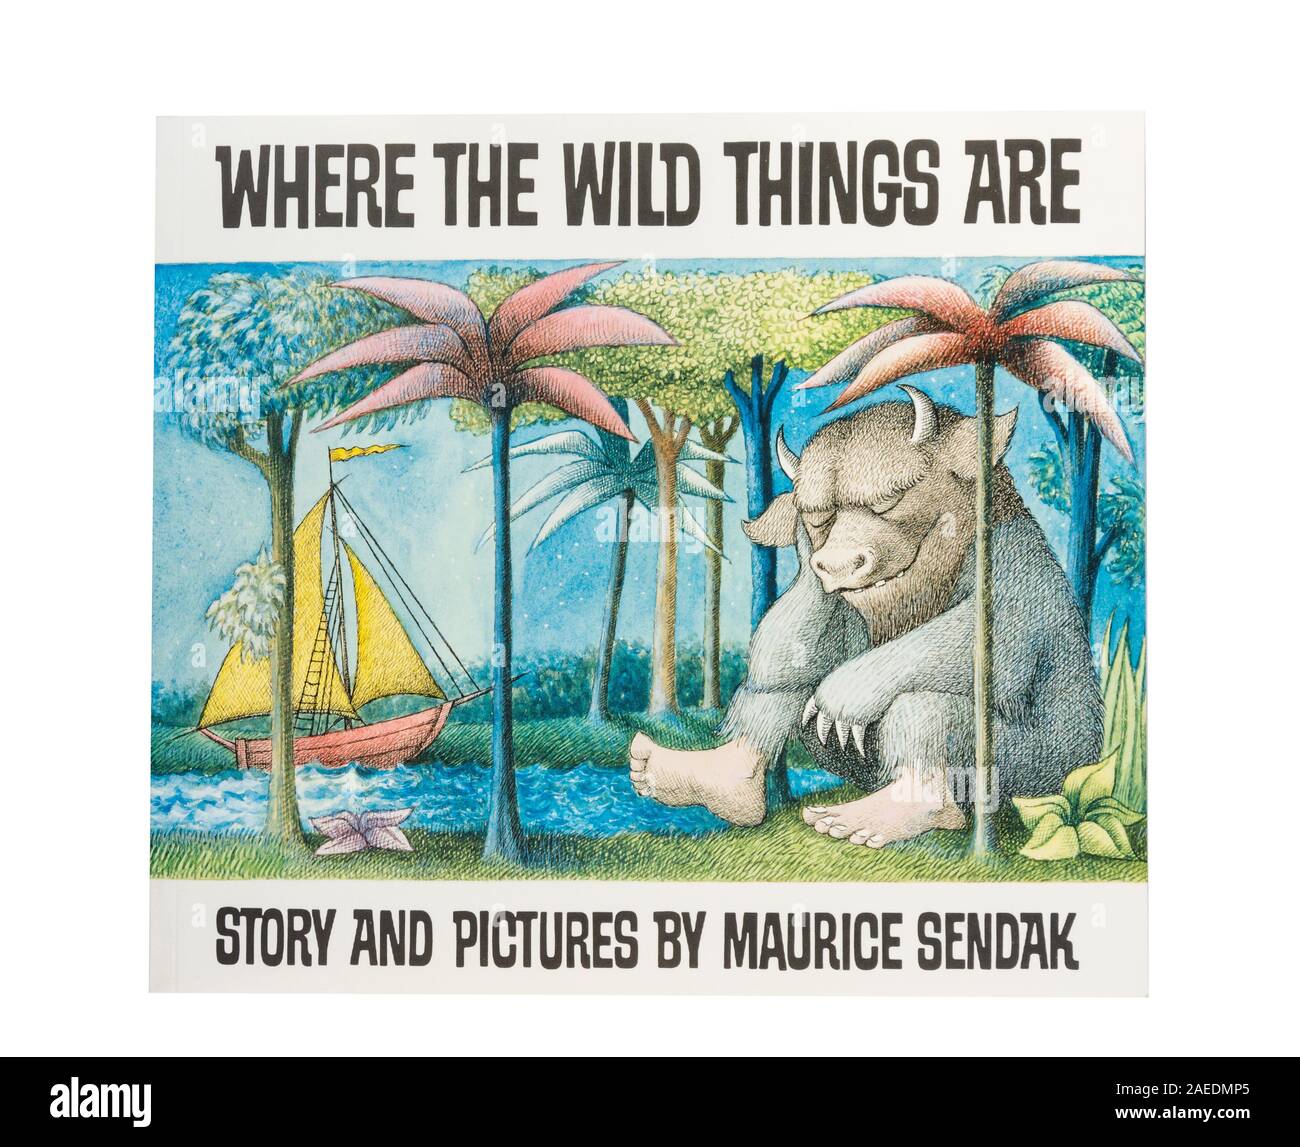 'Where the Wild Things are' children's book written by Maurice Sendak, Greater London, England, United Kingdom Stock Photo